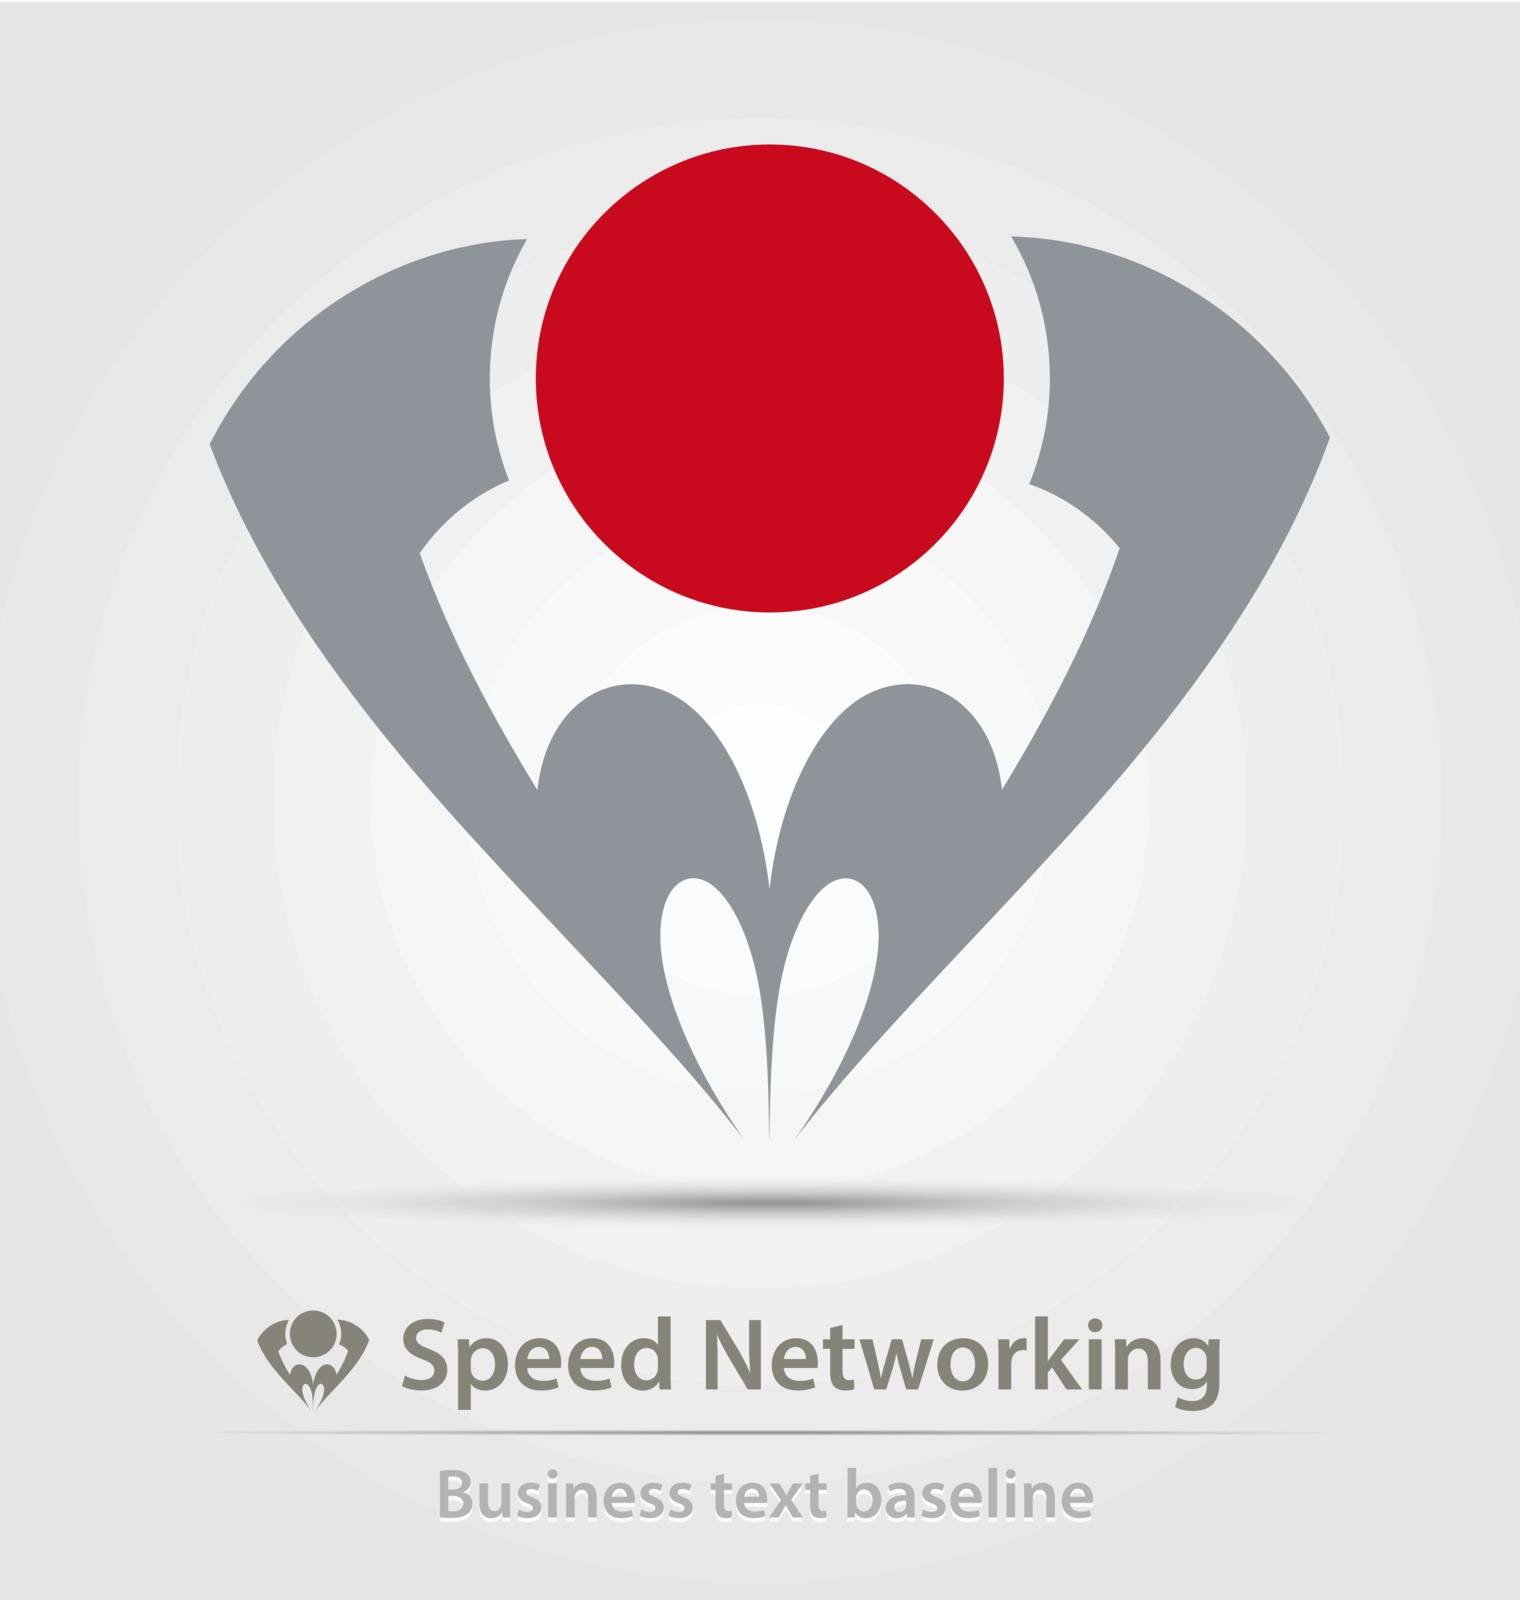 Speed networking business icon by stocklady